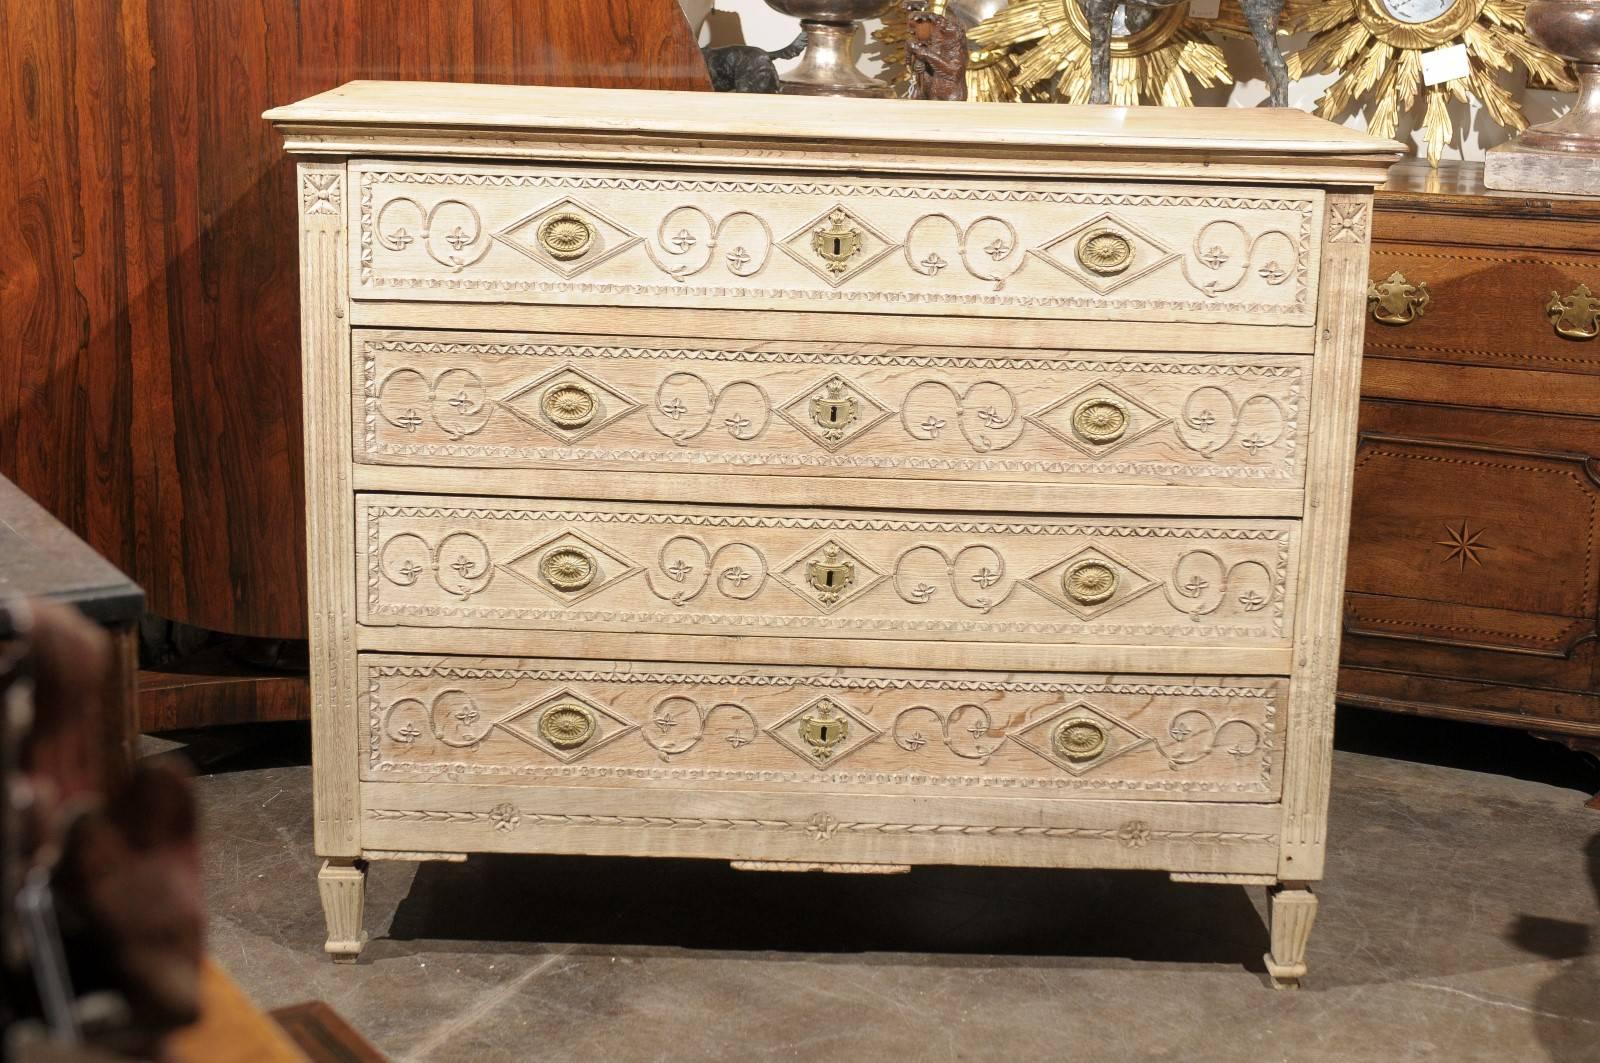 French commode with floral and geometrical motifs from the 19th century.  This late 19th century French bleached commode features a three-plank rectangular molded top over four capacious dovetailed drawers and framed molded sides. Each drawer is